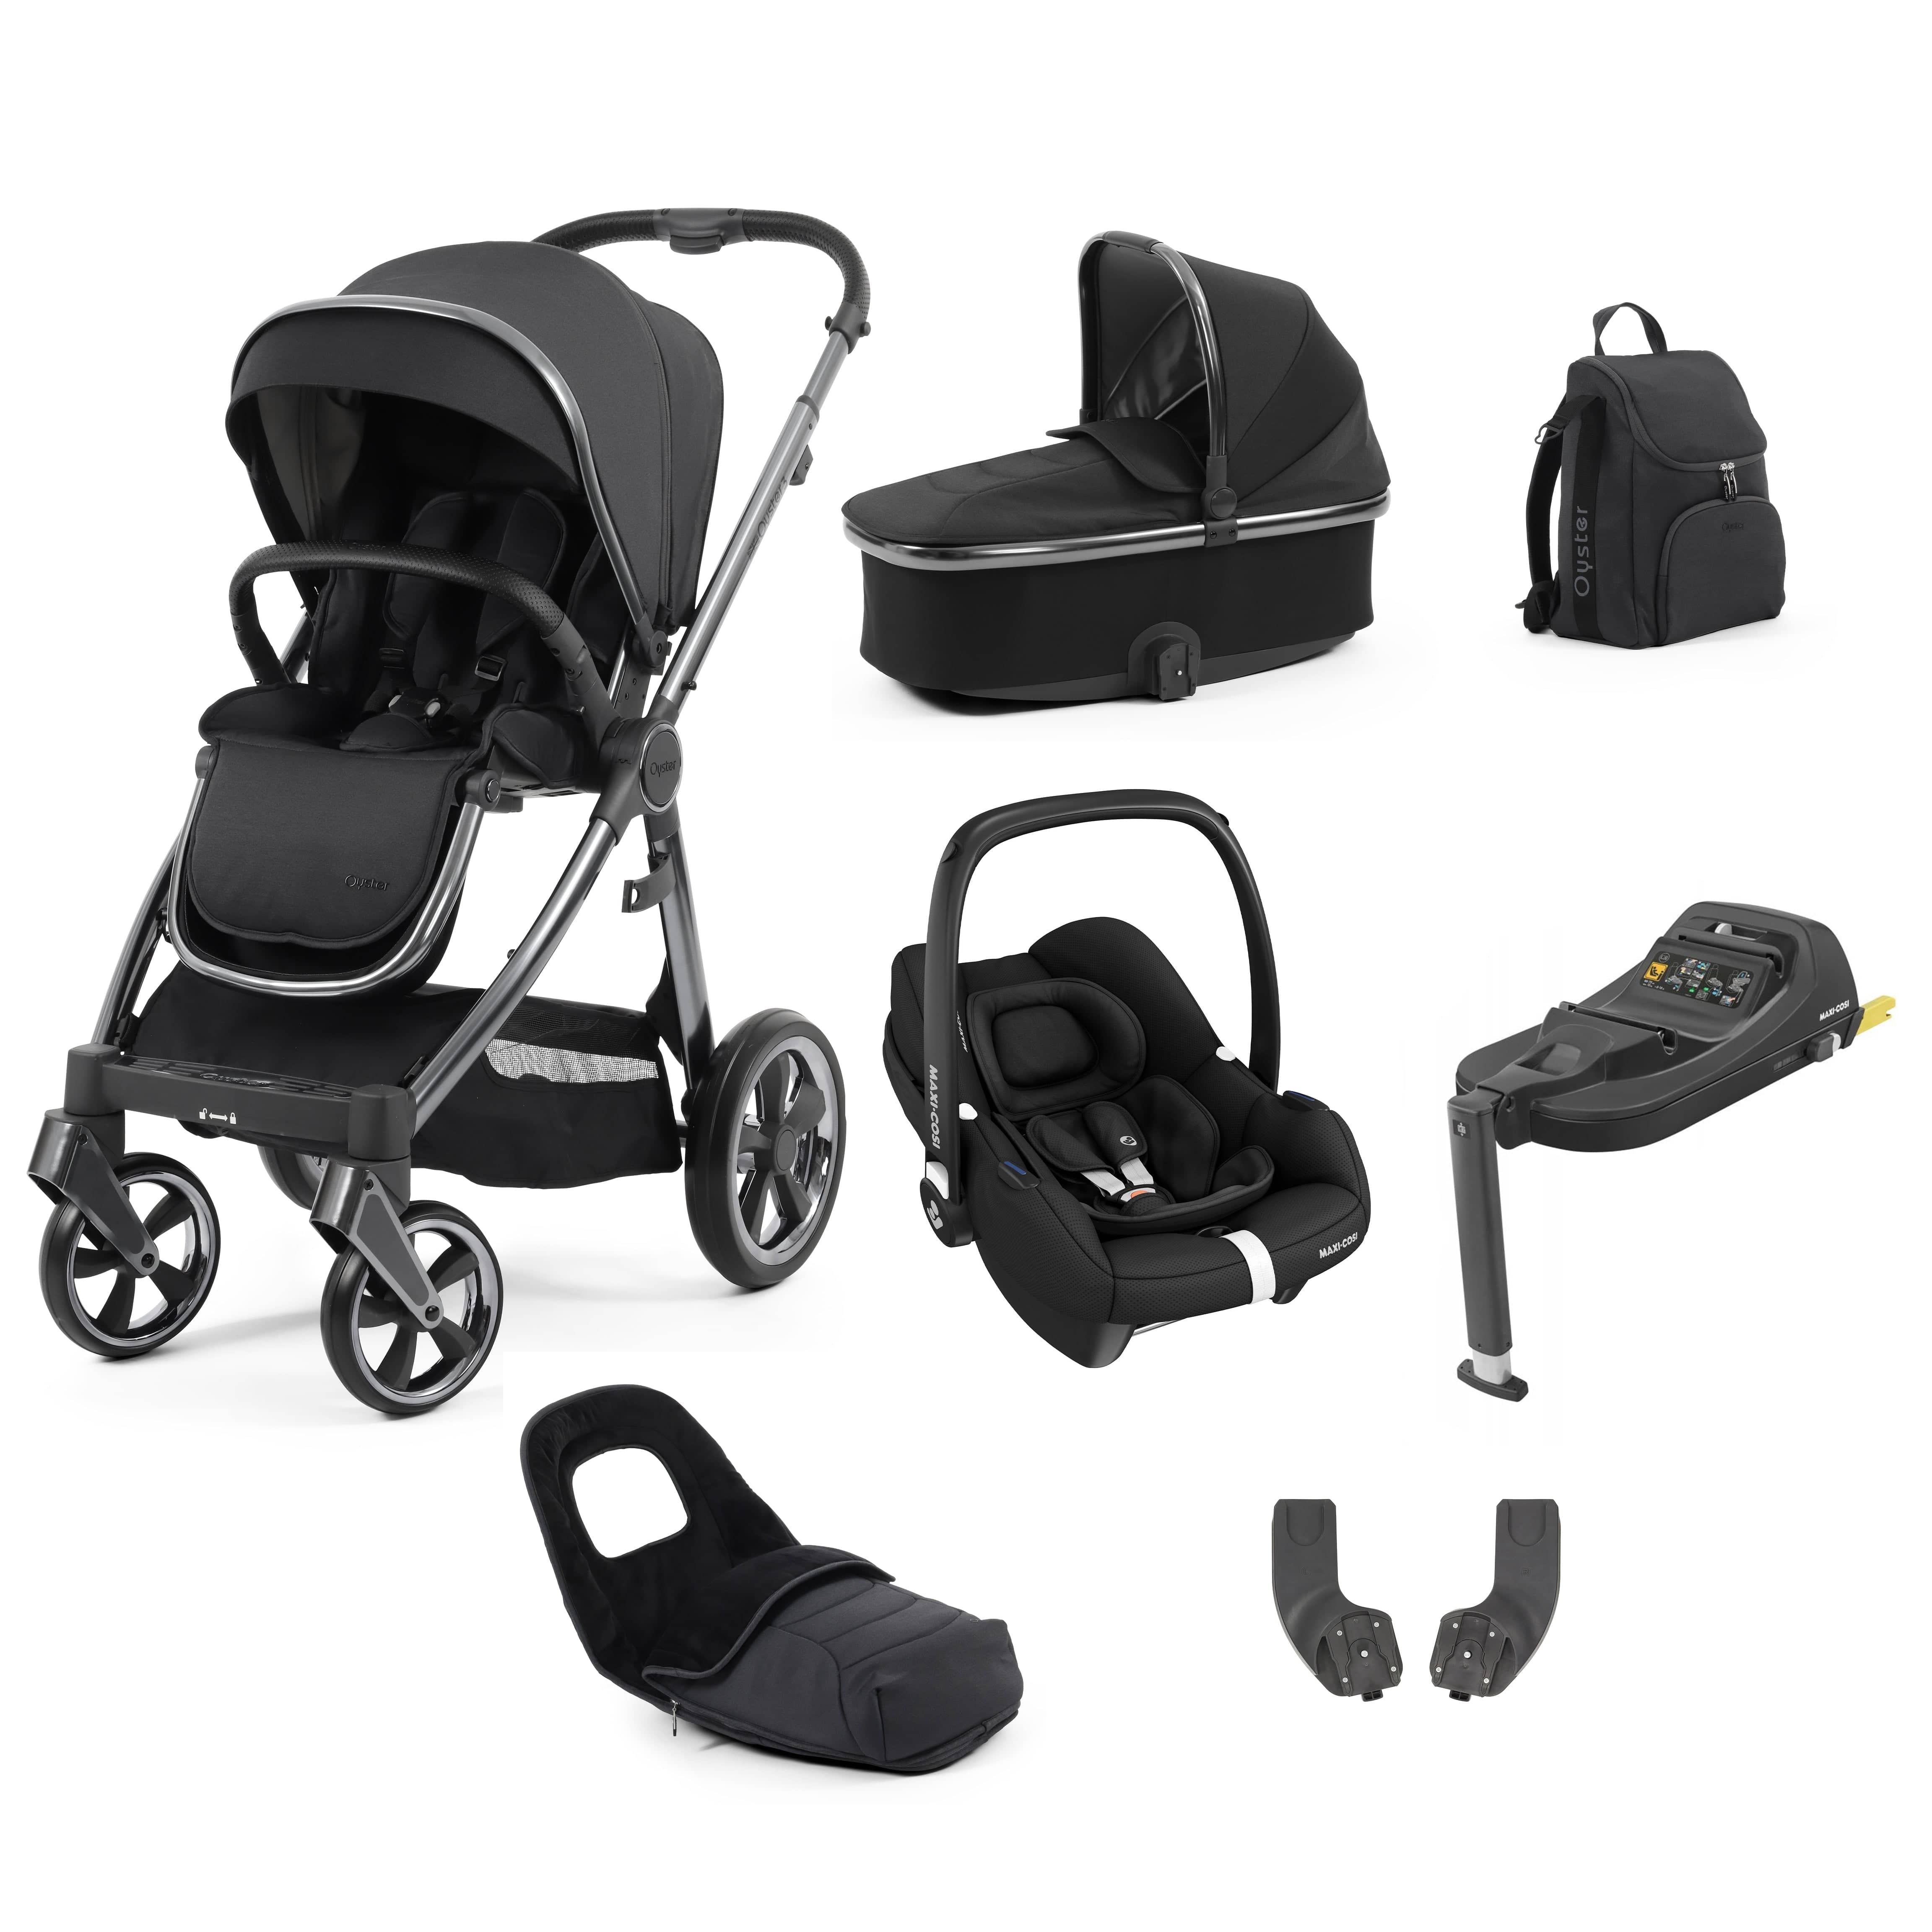 Babystyle Oyster 3 Luxury 7 Piece with Car Seat Bundle in Carbonite Travel Systems 14812-CRB 5060711567242